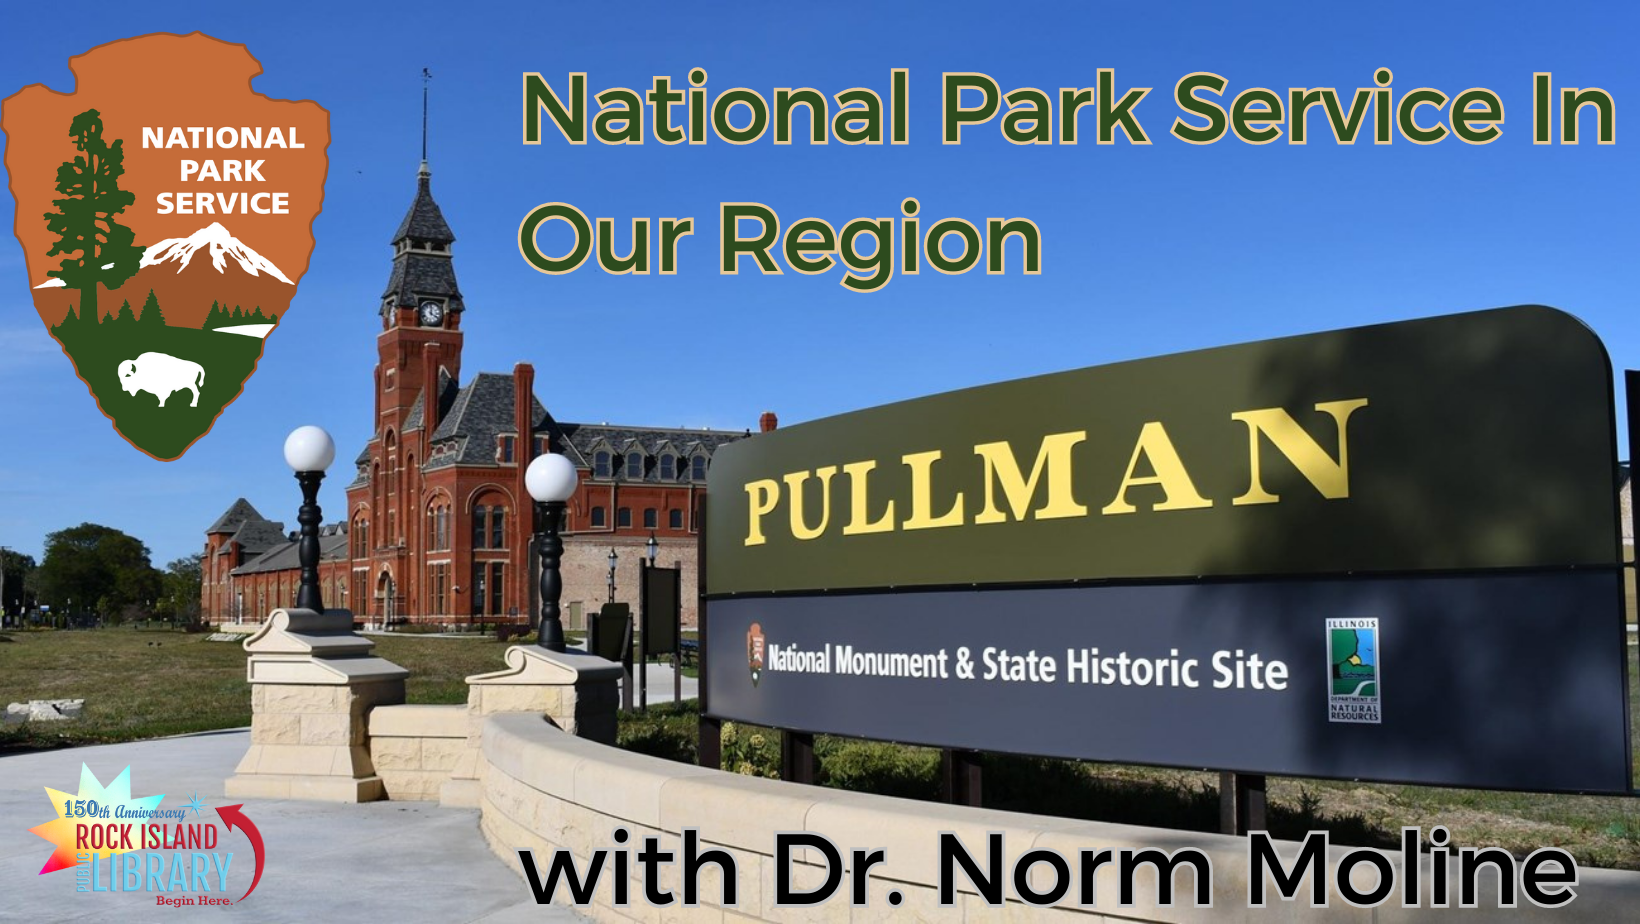 image of Pullman national historic site in background, National Park Service logo, words National Park Service in our Region with Dr. Norm Moline